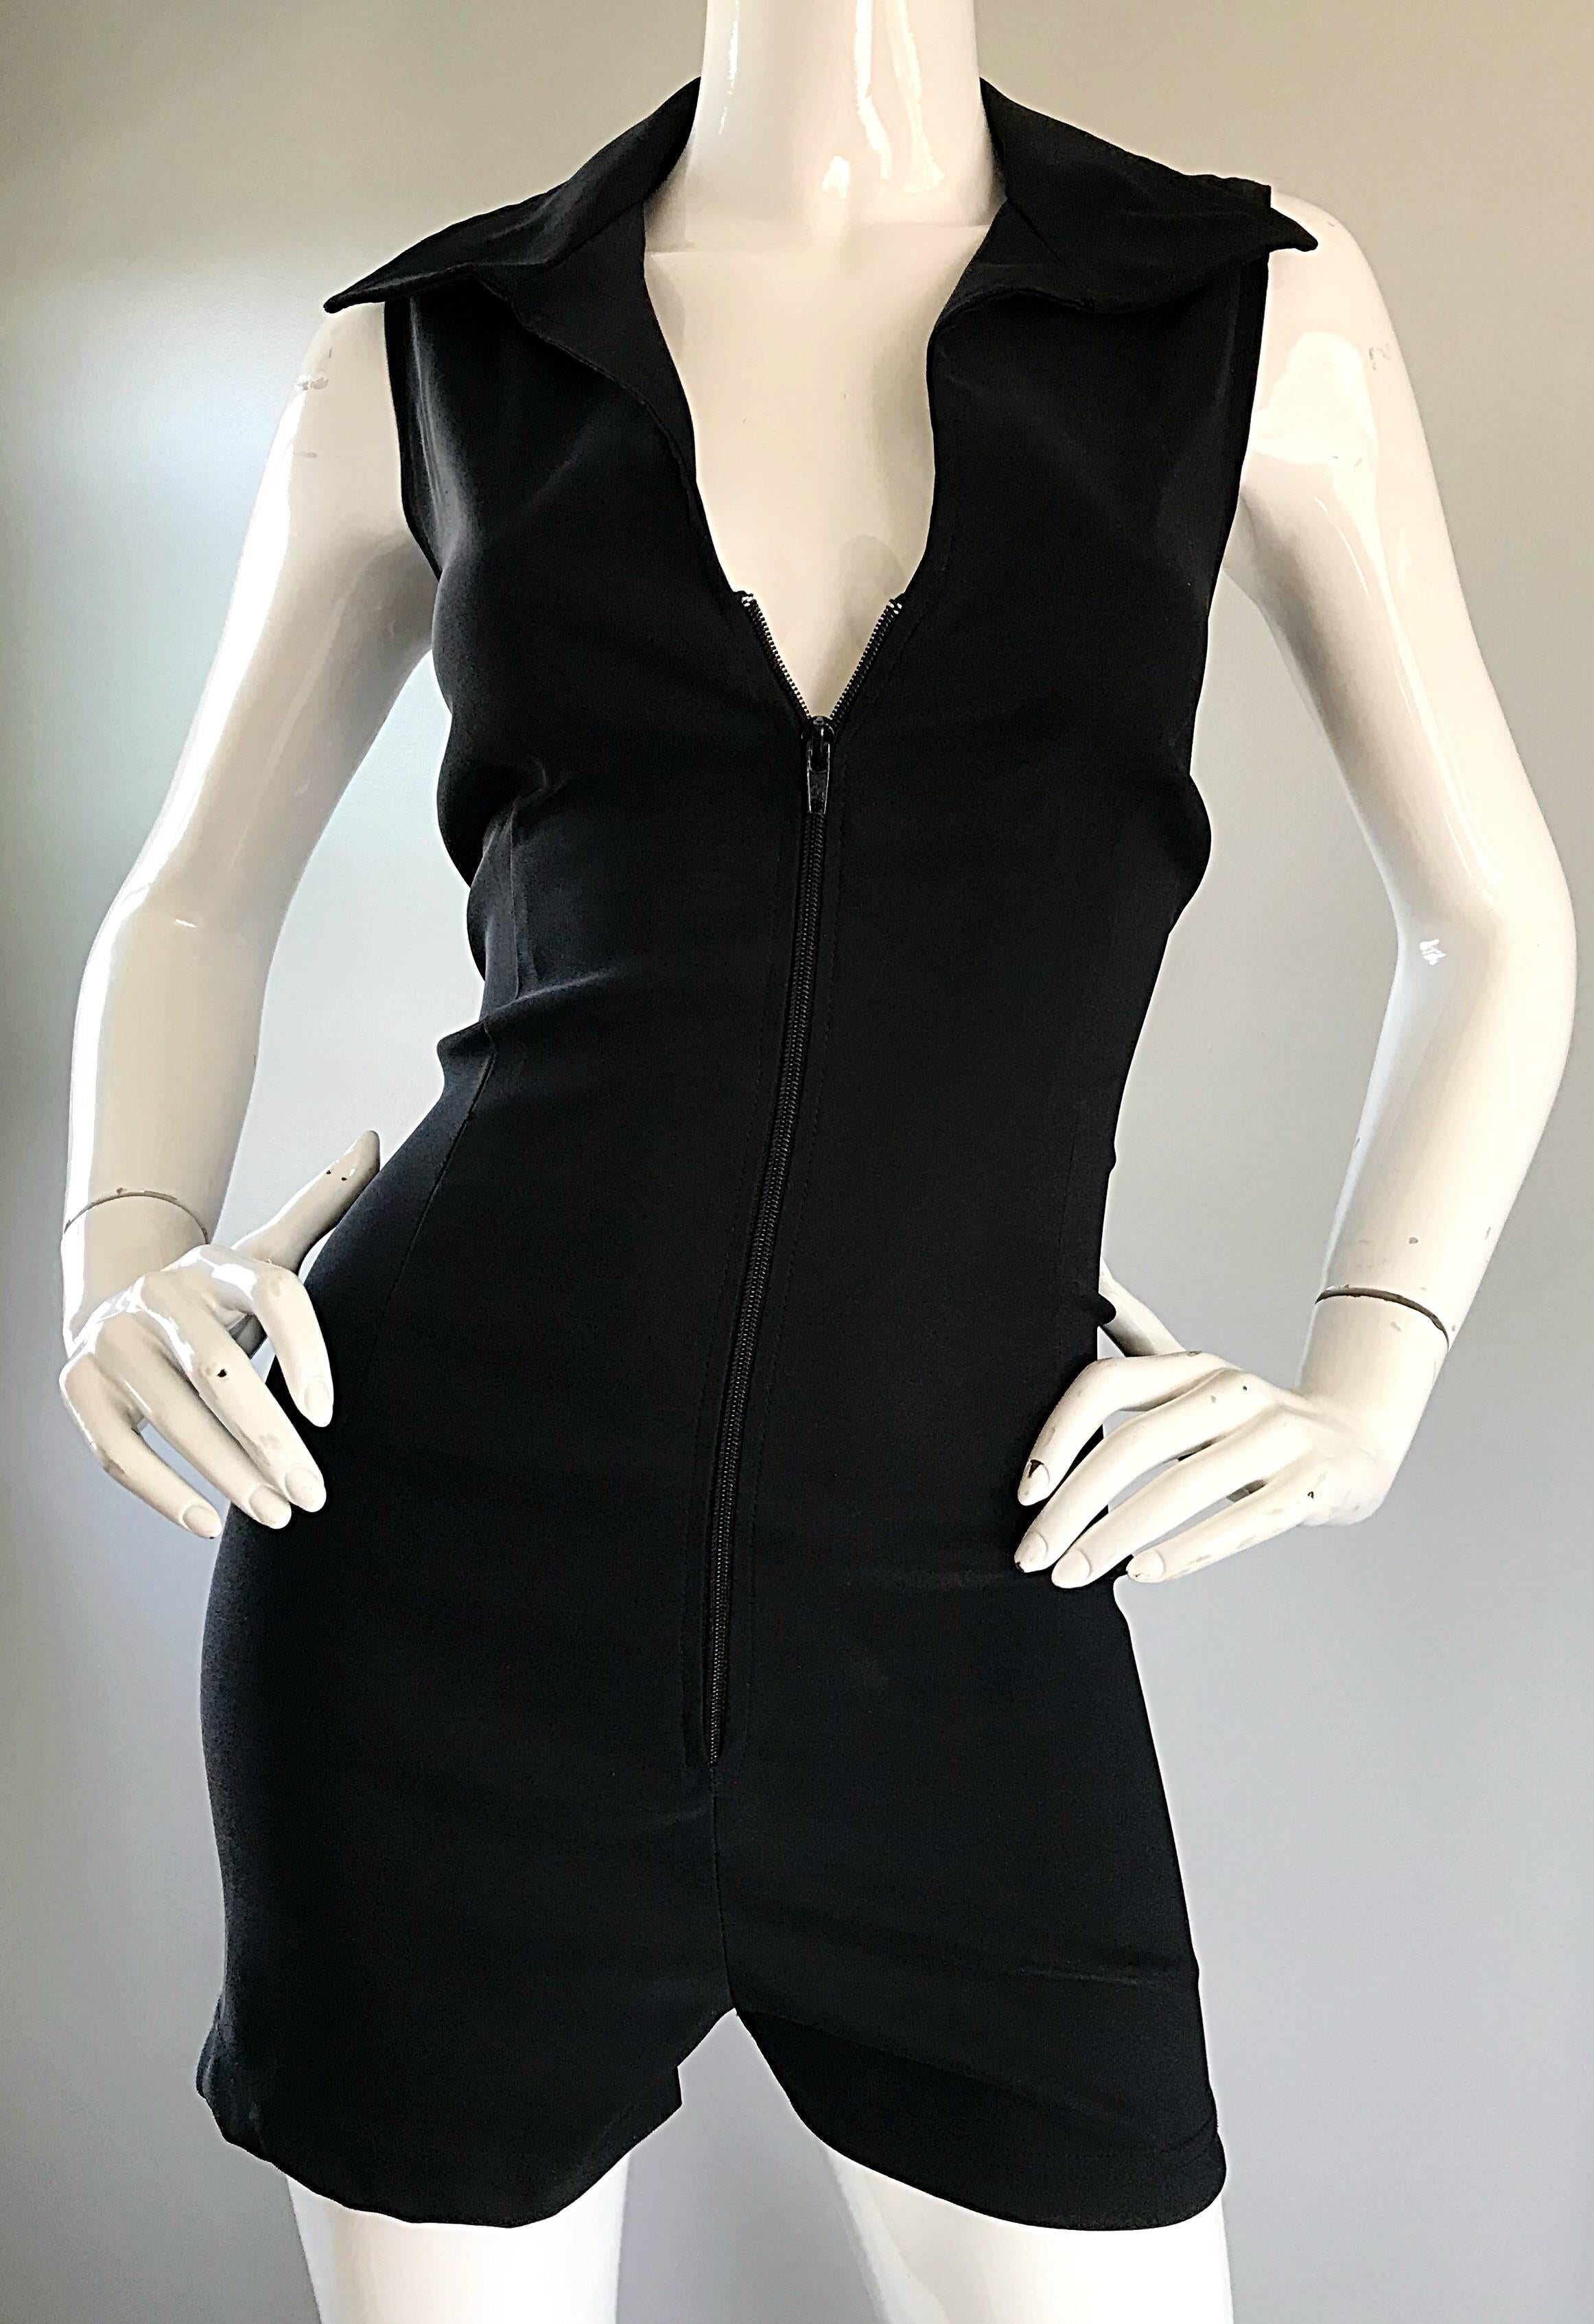 1990s Does 1970s Black Crepe Sleeveless One Piece 90s Vintage Romper Jumpsuit For Sale 1